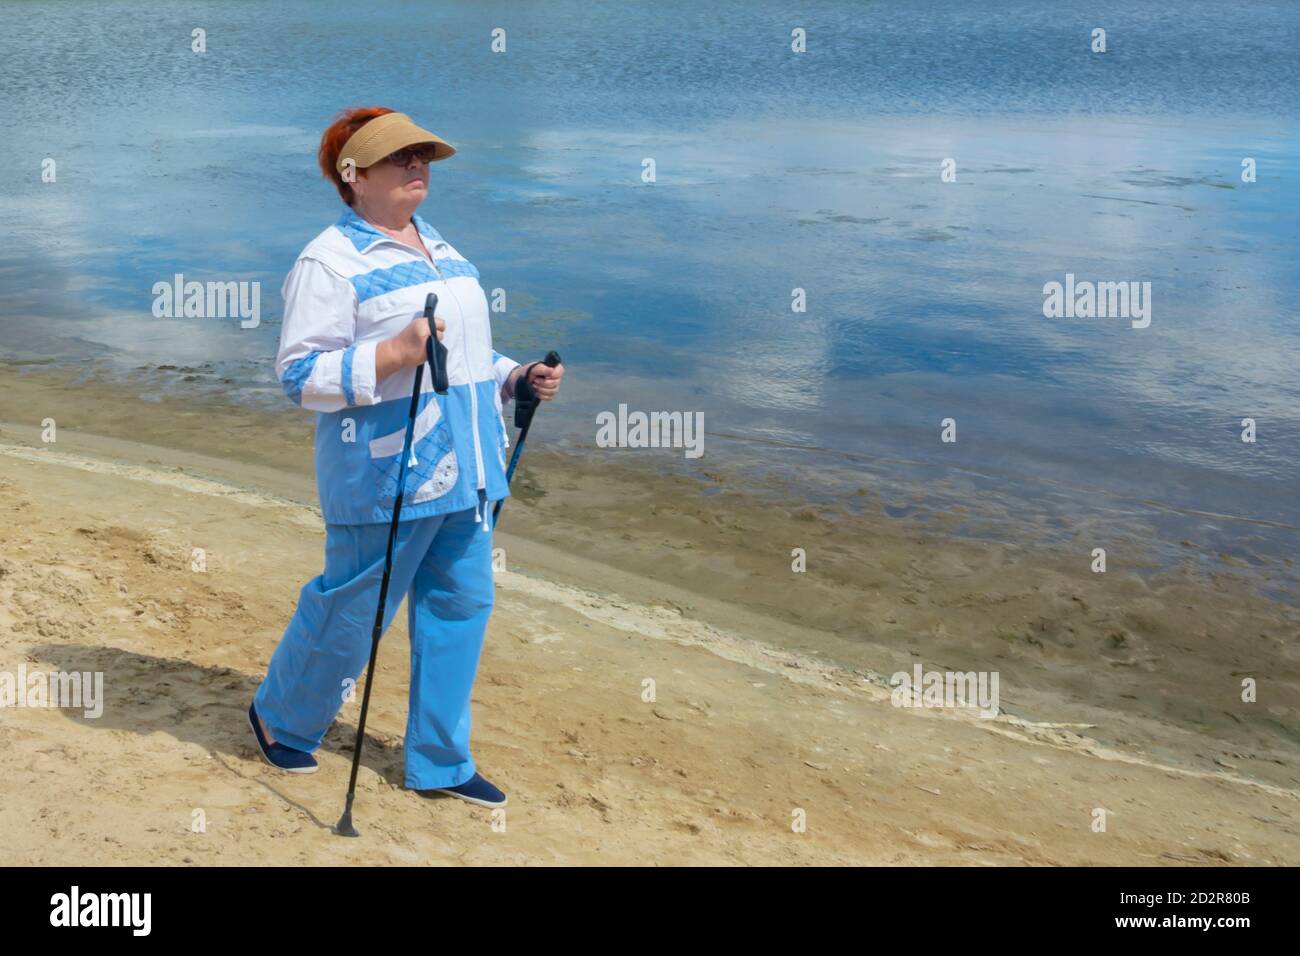 An elderly woman trains in Nordic walking with sticks. Taking care of health and an active lifestyle in old age. Soft focus, blur. Stock Photo